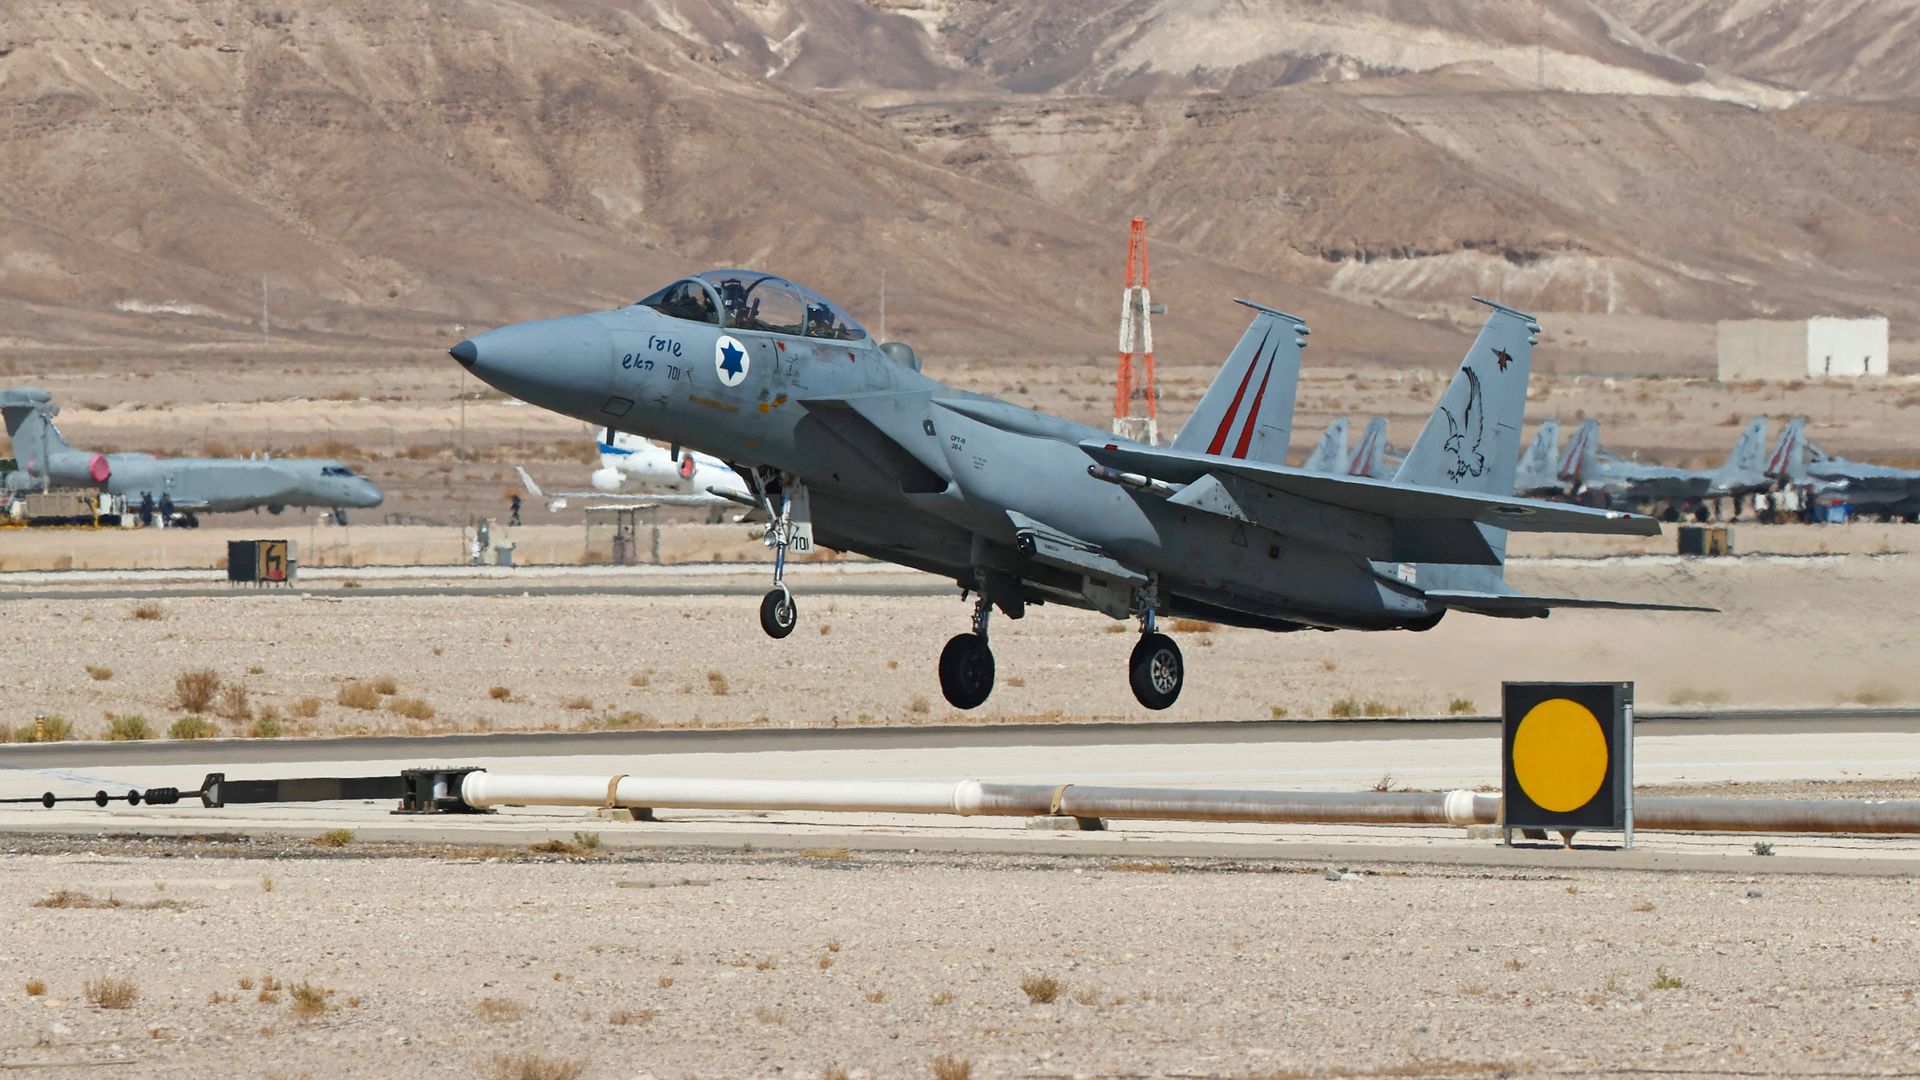 An Israeli air force F-15 fighter on Oct. 24, 2021, at the Ovda air force north of Eilat, Israel. Photo: Jack Guez/AFP via Getty Images